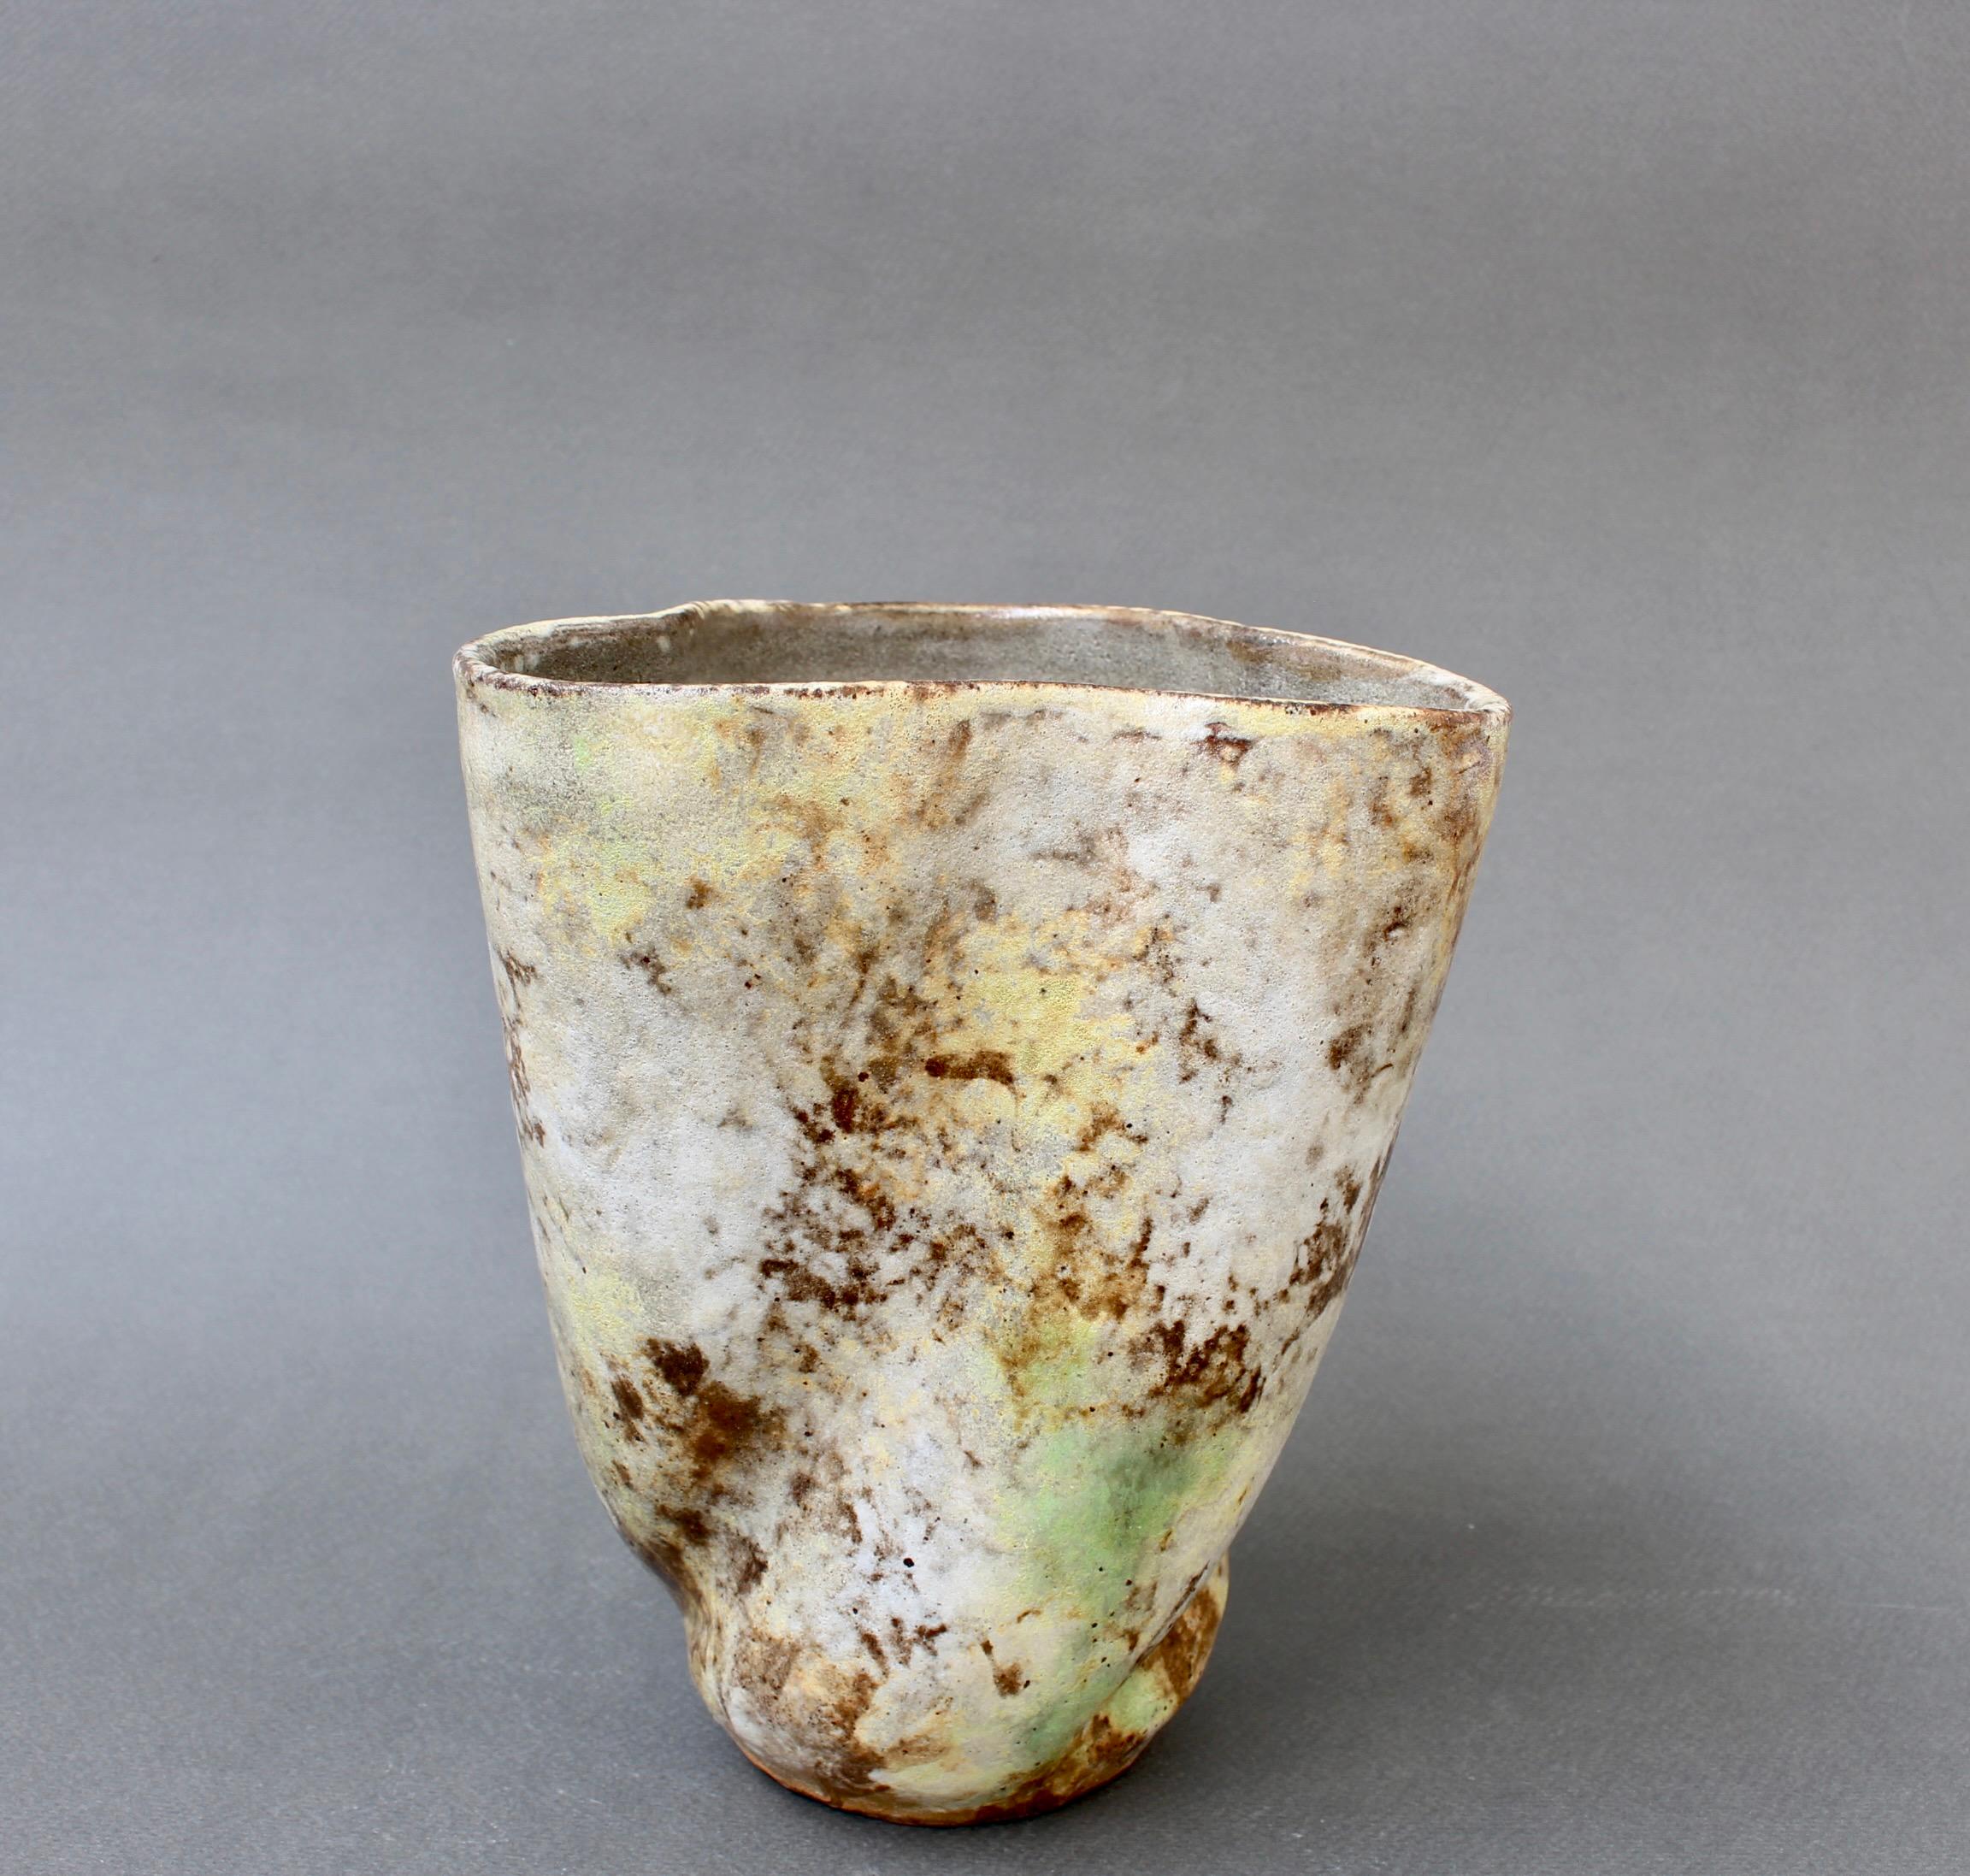 French Mid-Century ceramic flower vase by Alexandre Kostanda, Vallauris, France (circa 1960s). In his trademark natural clay and rustic style, Kostanda created beautifully original vessels, such as vases, pitchers and pots which were both